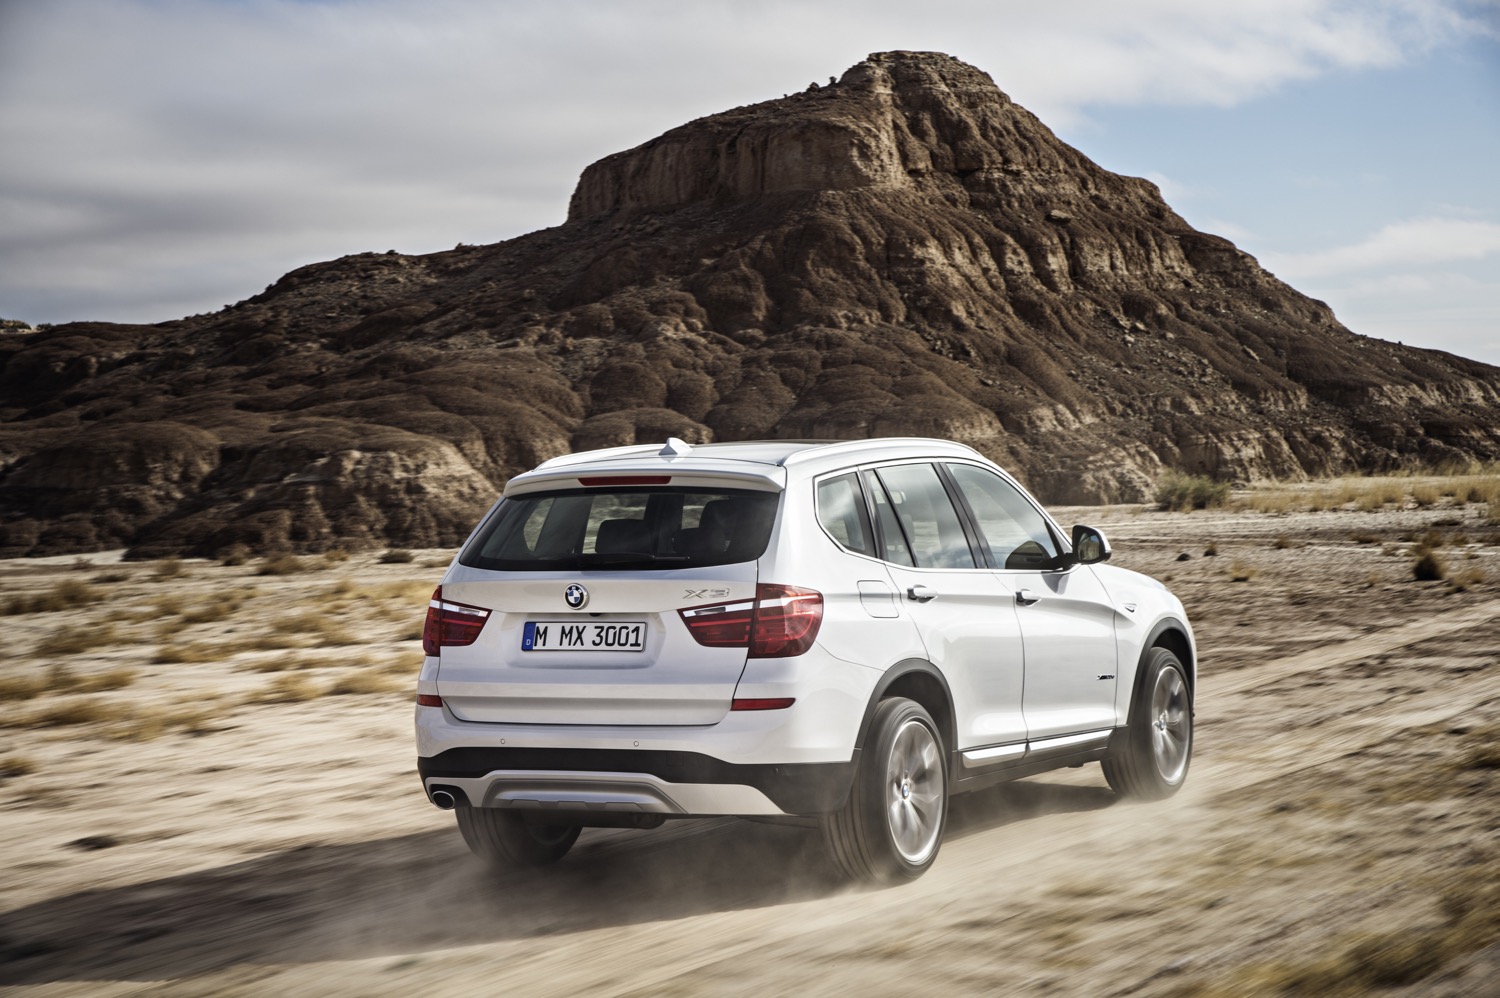 Bmw x3 dynamic handling package review #7